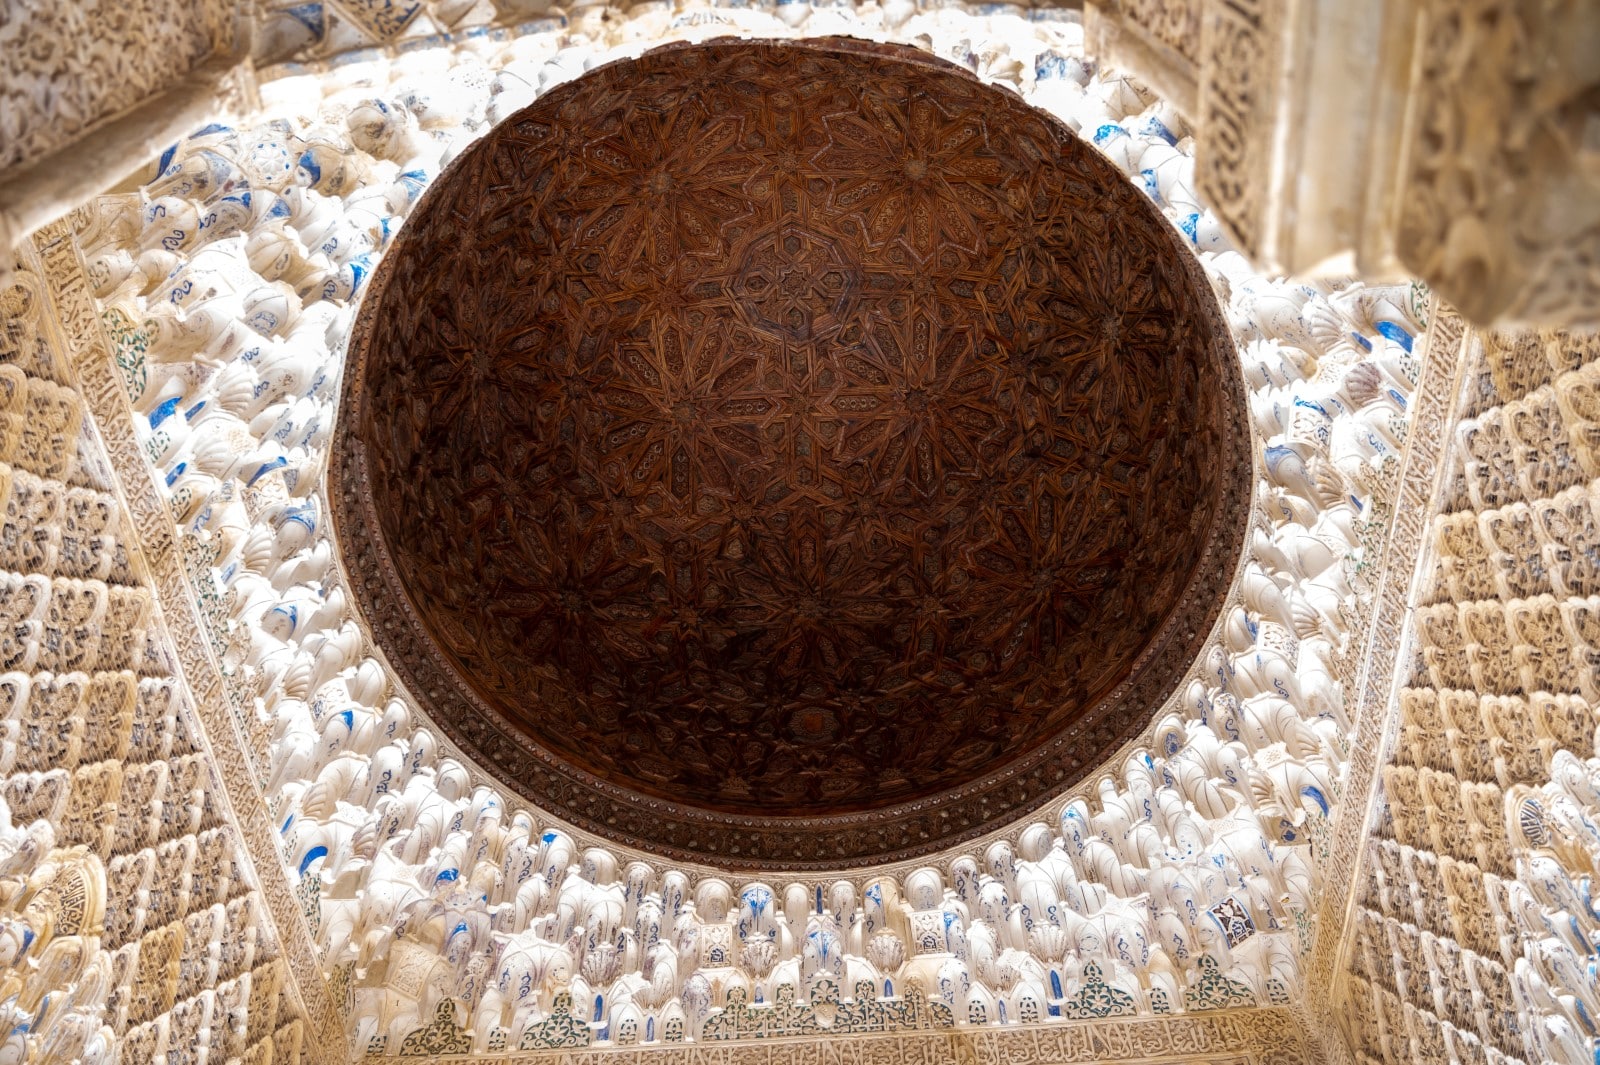 Ornamental ceiling and walls in Nasrid Palaces in the Alhambra Palace